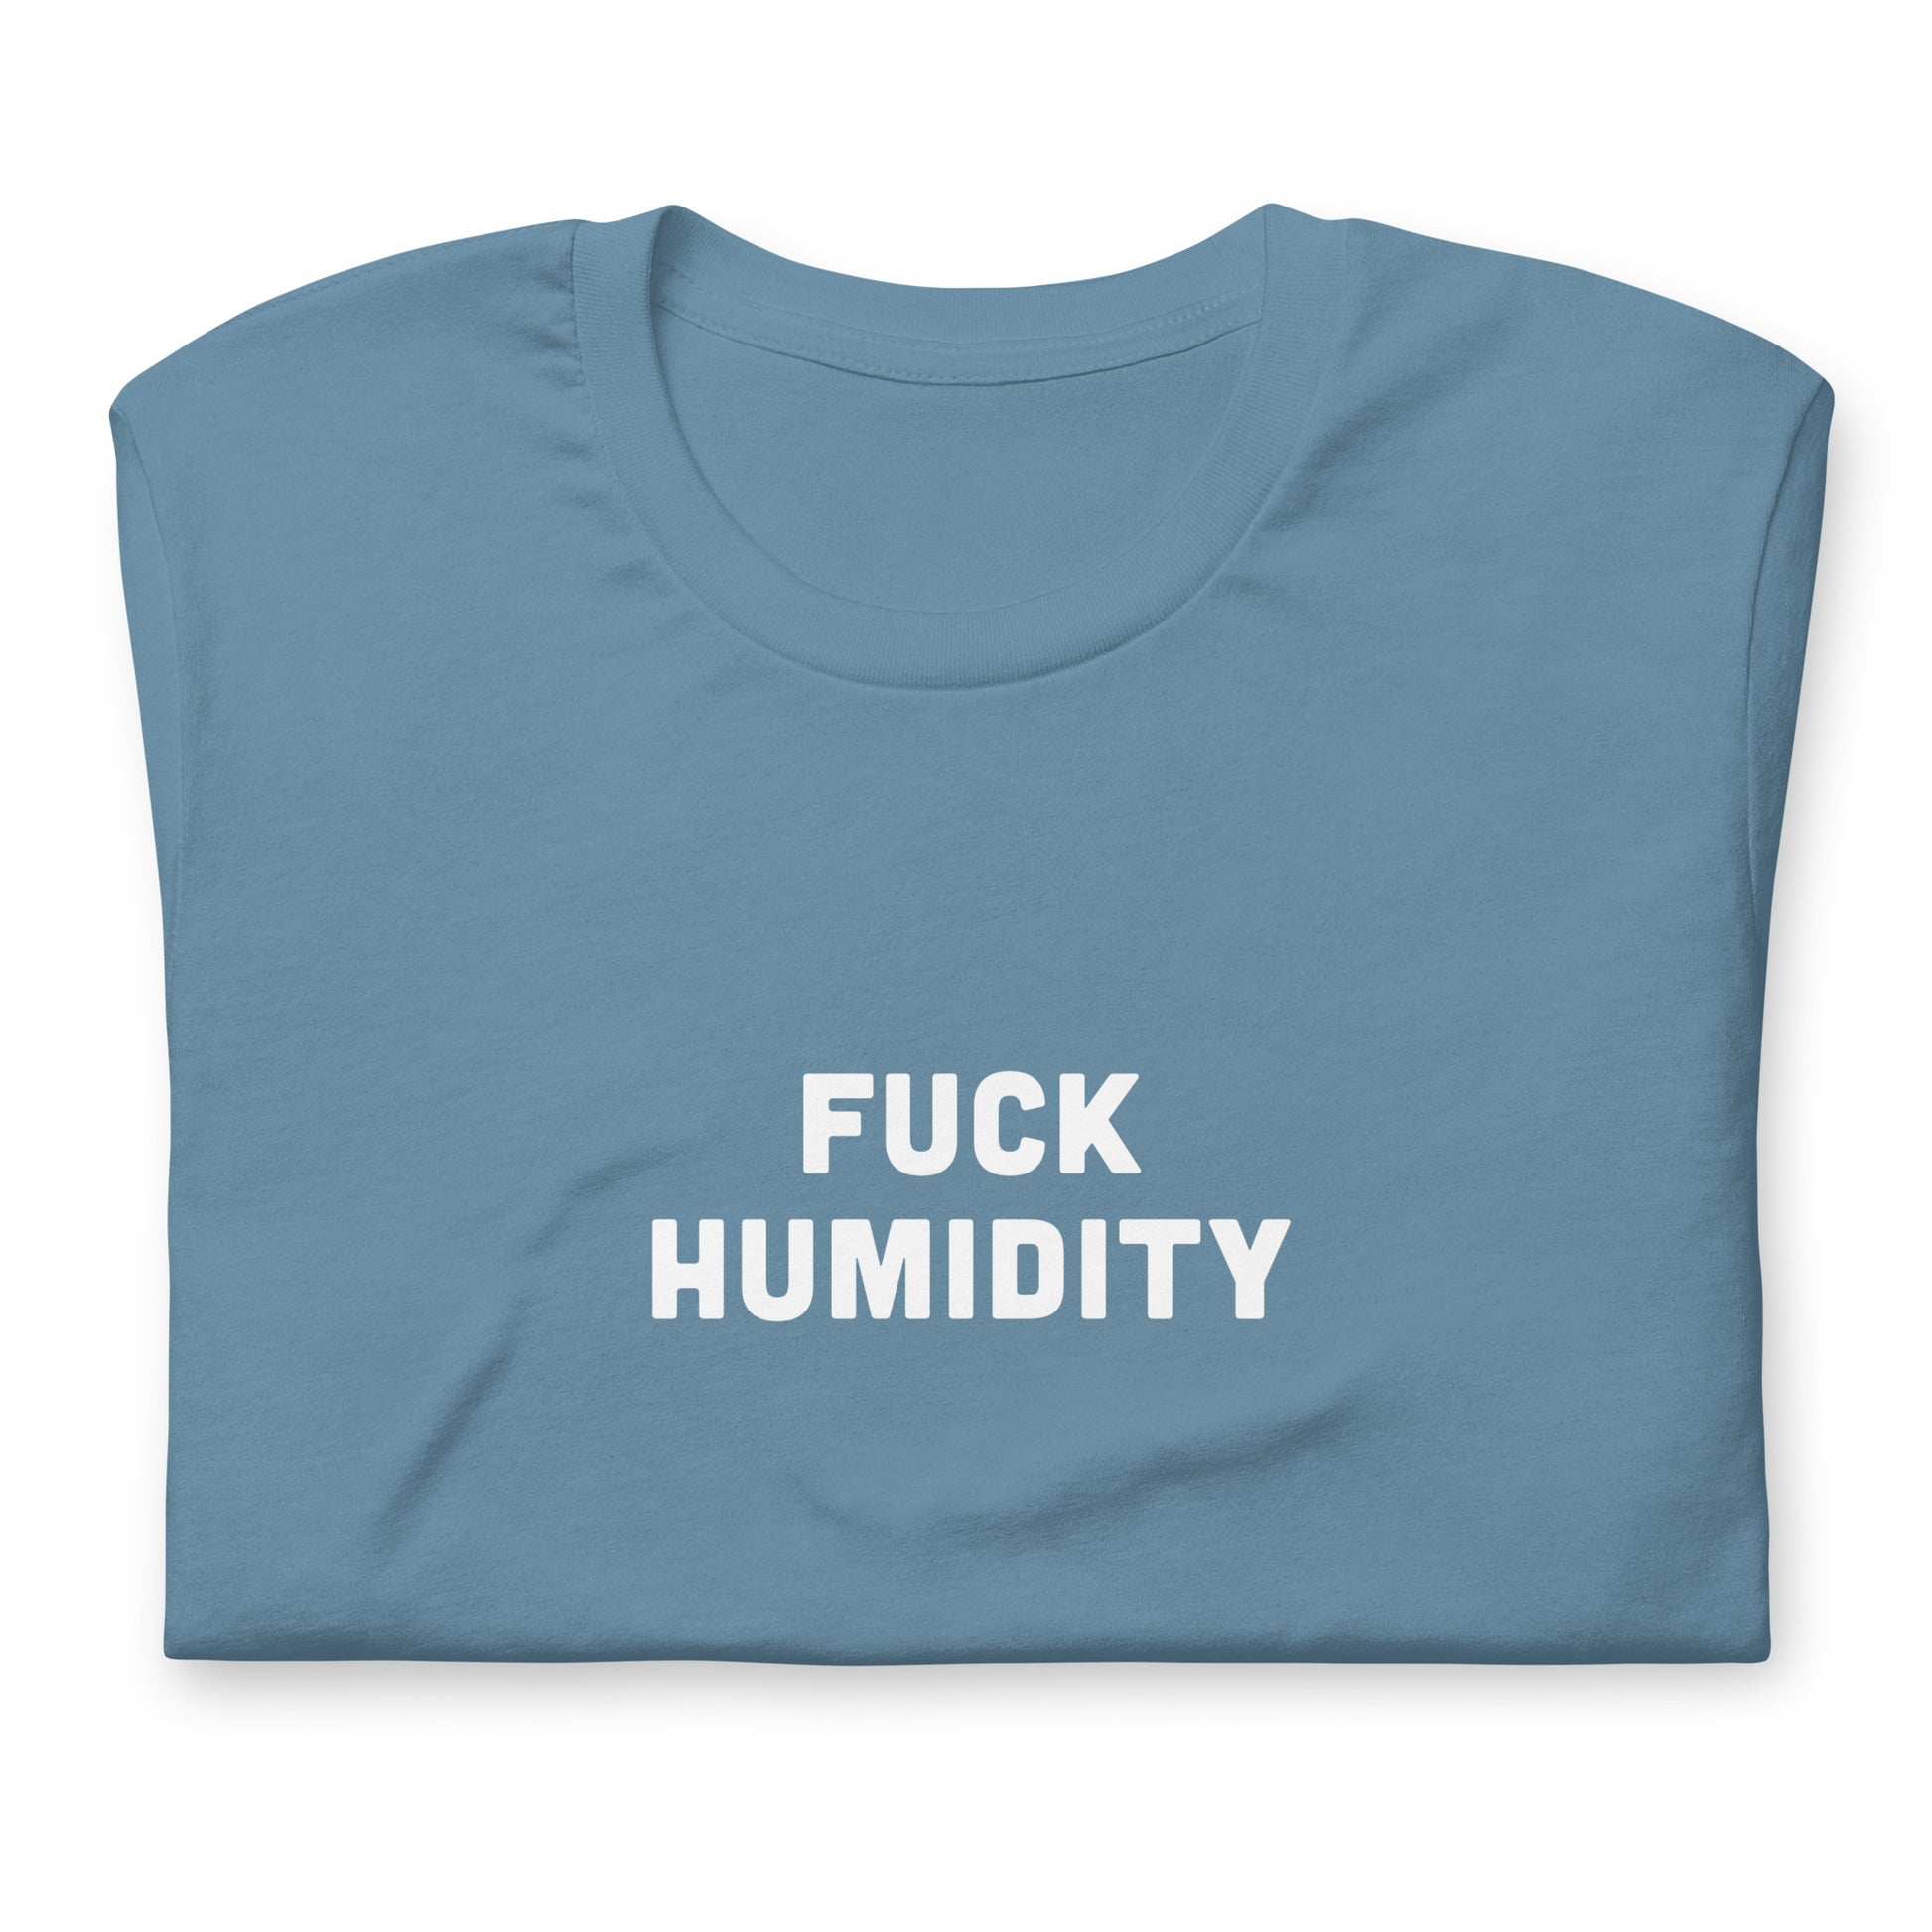 Fuck Humidity T-Shirt Size S Color Black